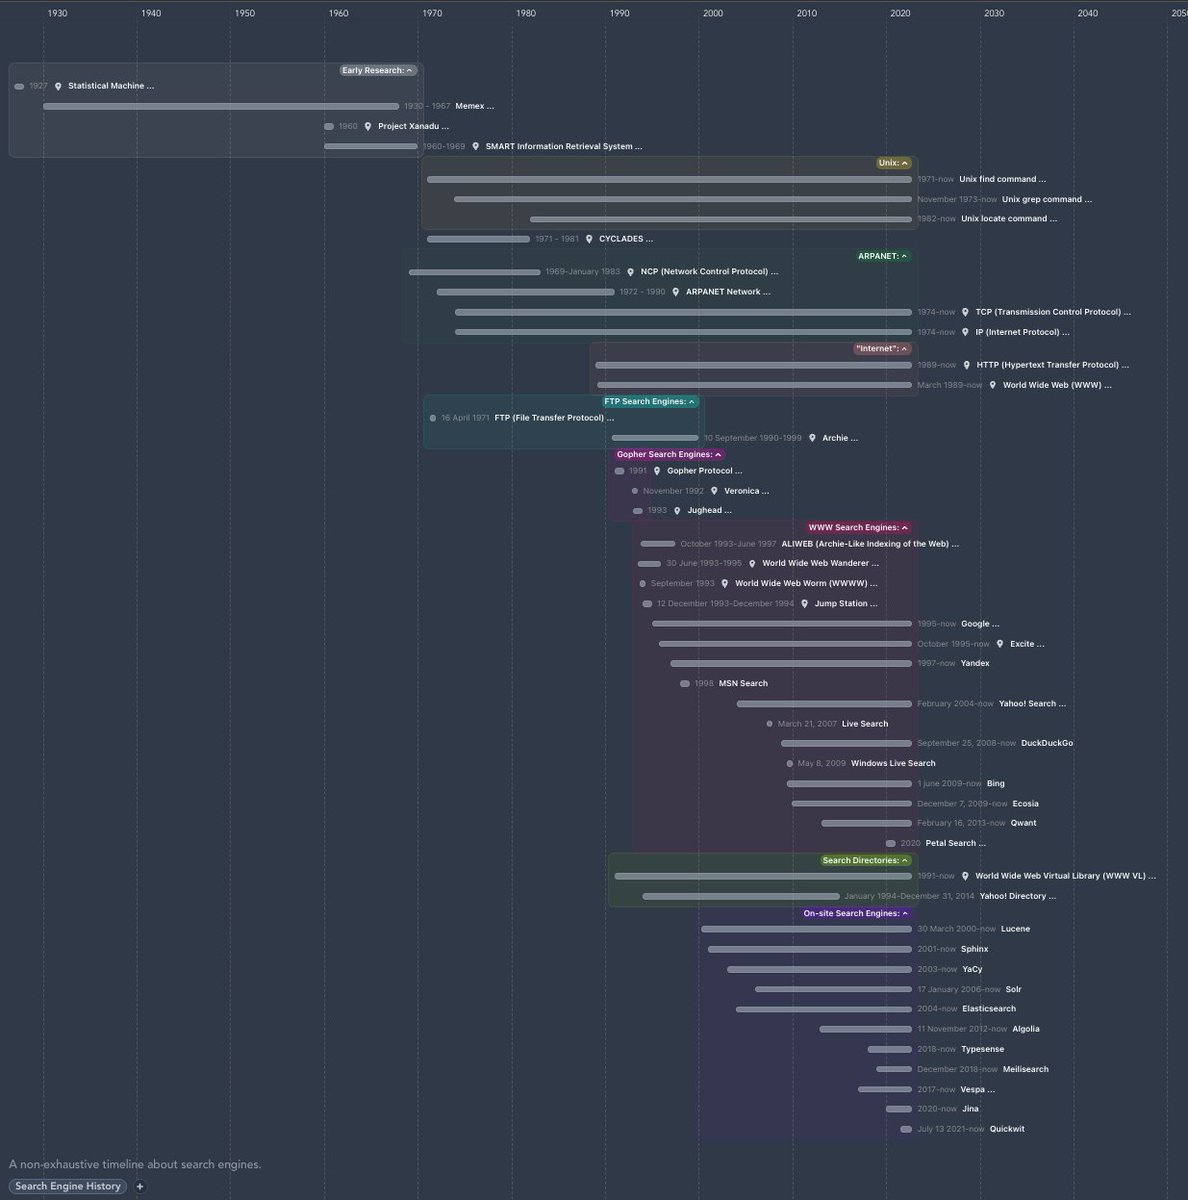 A few weeks ago I started a timeline to trace the history of search engines. It's obviously not exhaustive and lacks precision, but by open-sourcing it I imagine we can improve it and correct it over time. Feel free to contribute! markwhen.com/timeline/9d8db… github.com/gmourier/the-s…